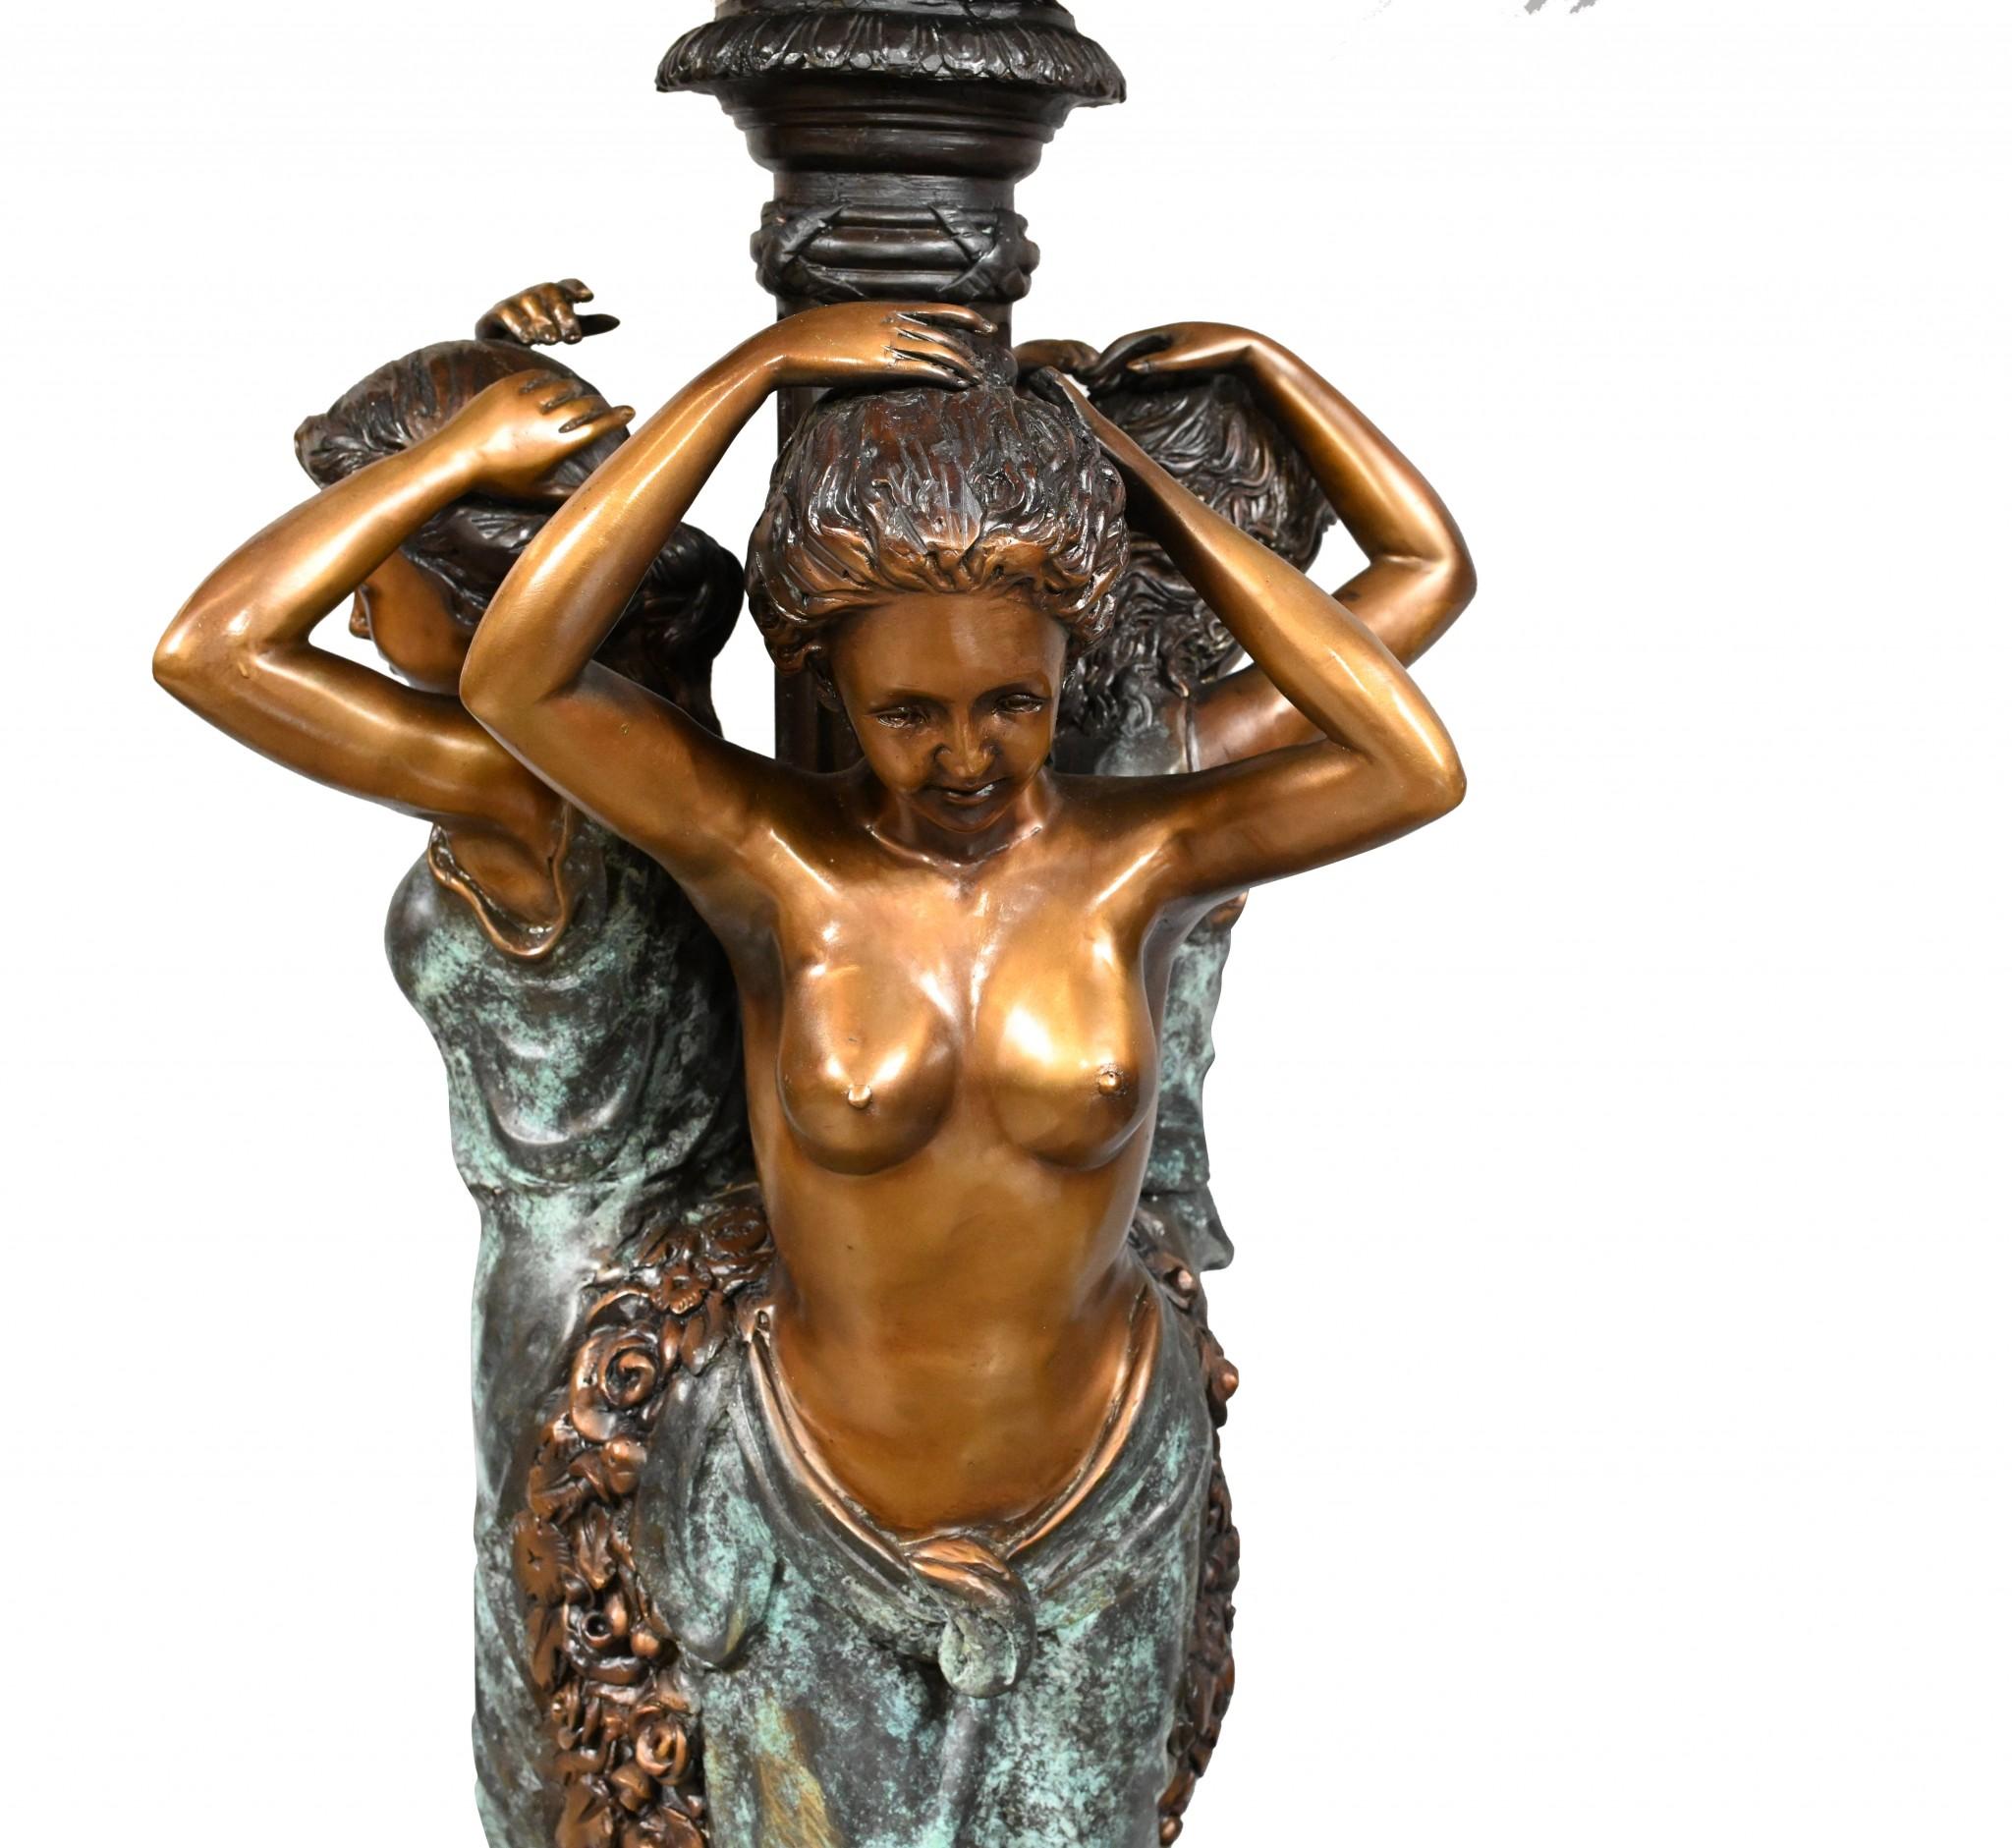 Stunning large French bronze fountain that stands in at almost six feet - 178 CM tall
Great for the garden and of course being bronze can live outside with no fear of rusting
Three classical maidens support central column
Also decorated with